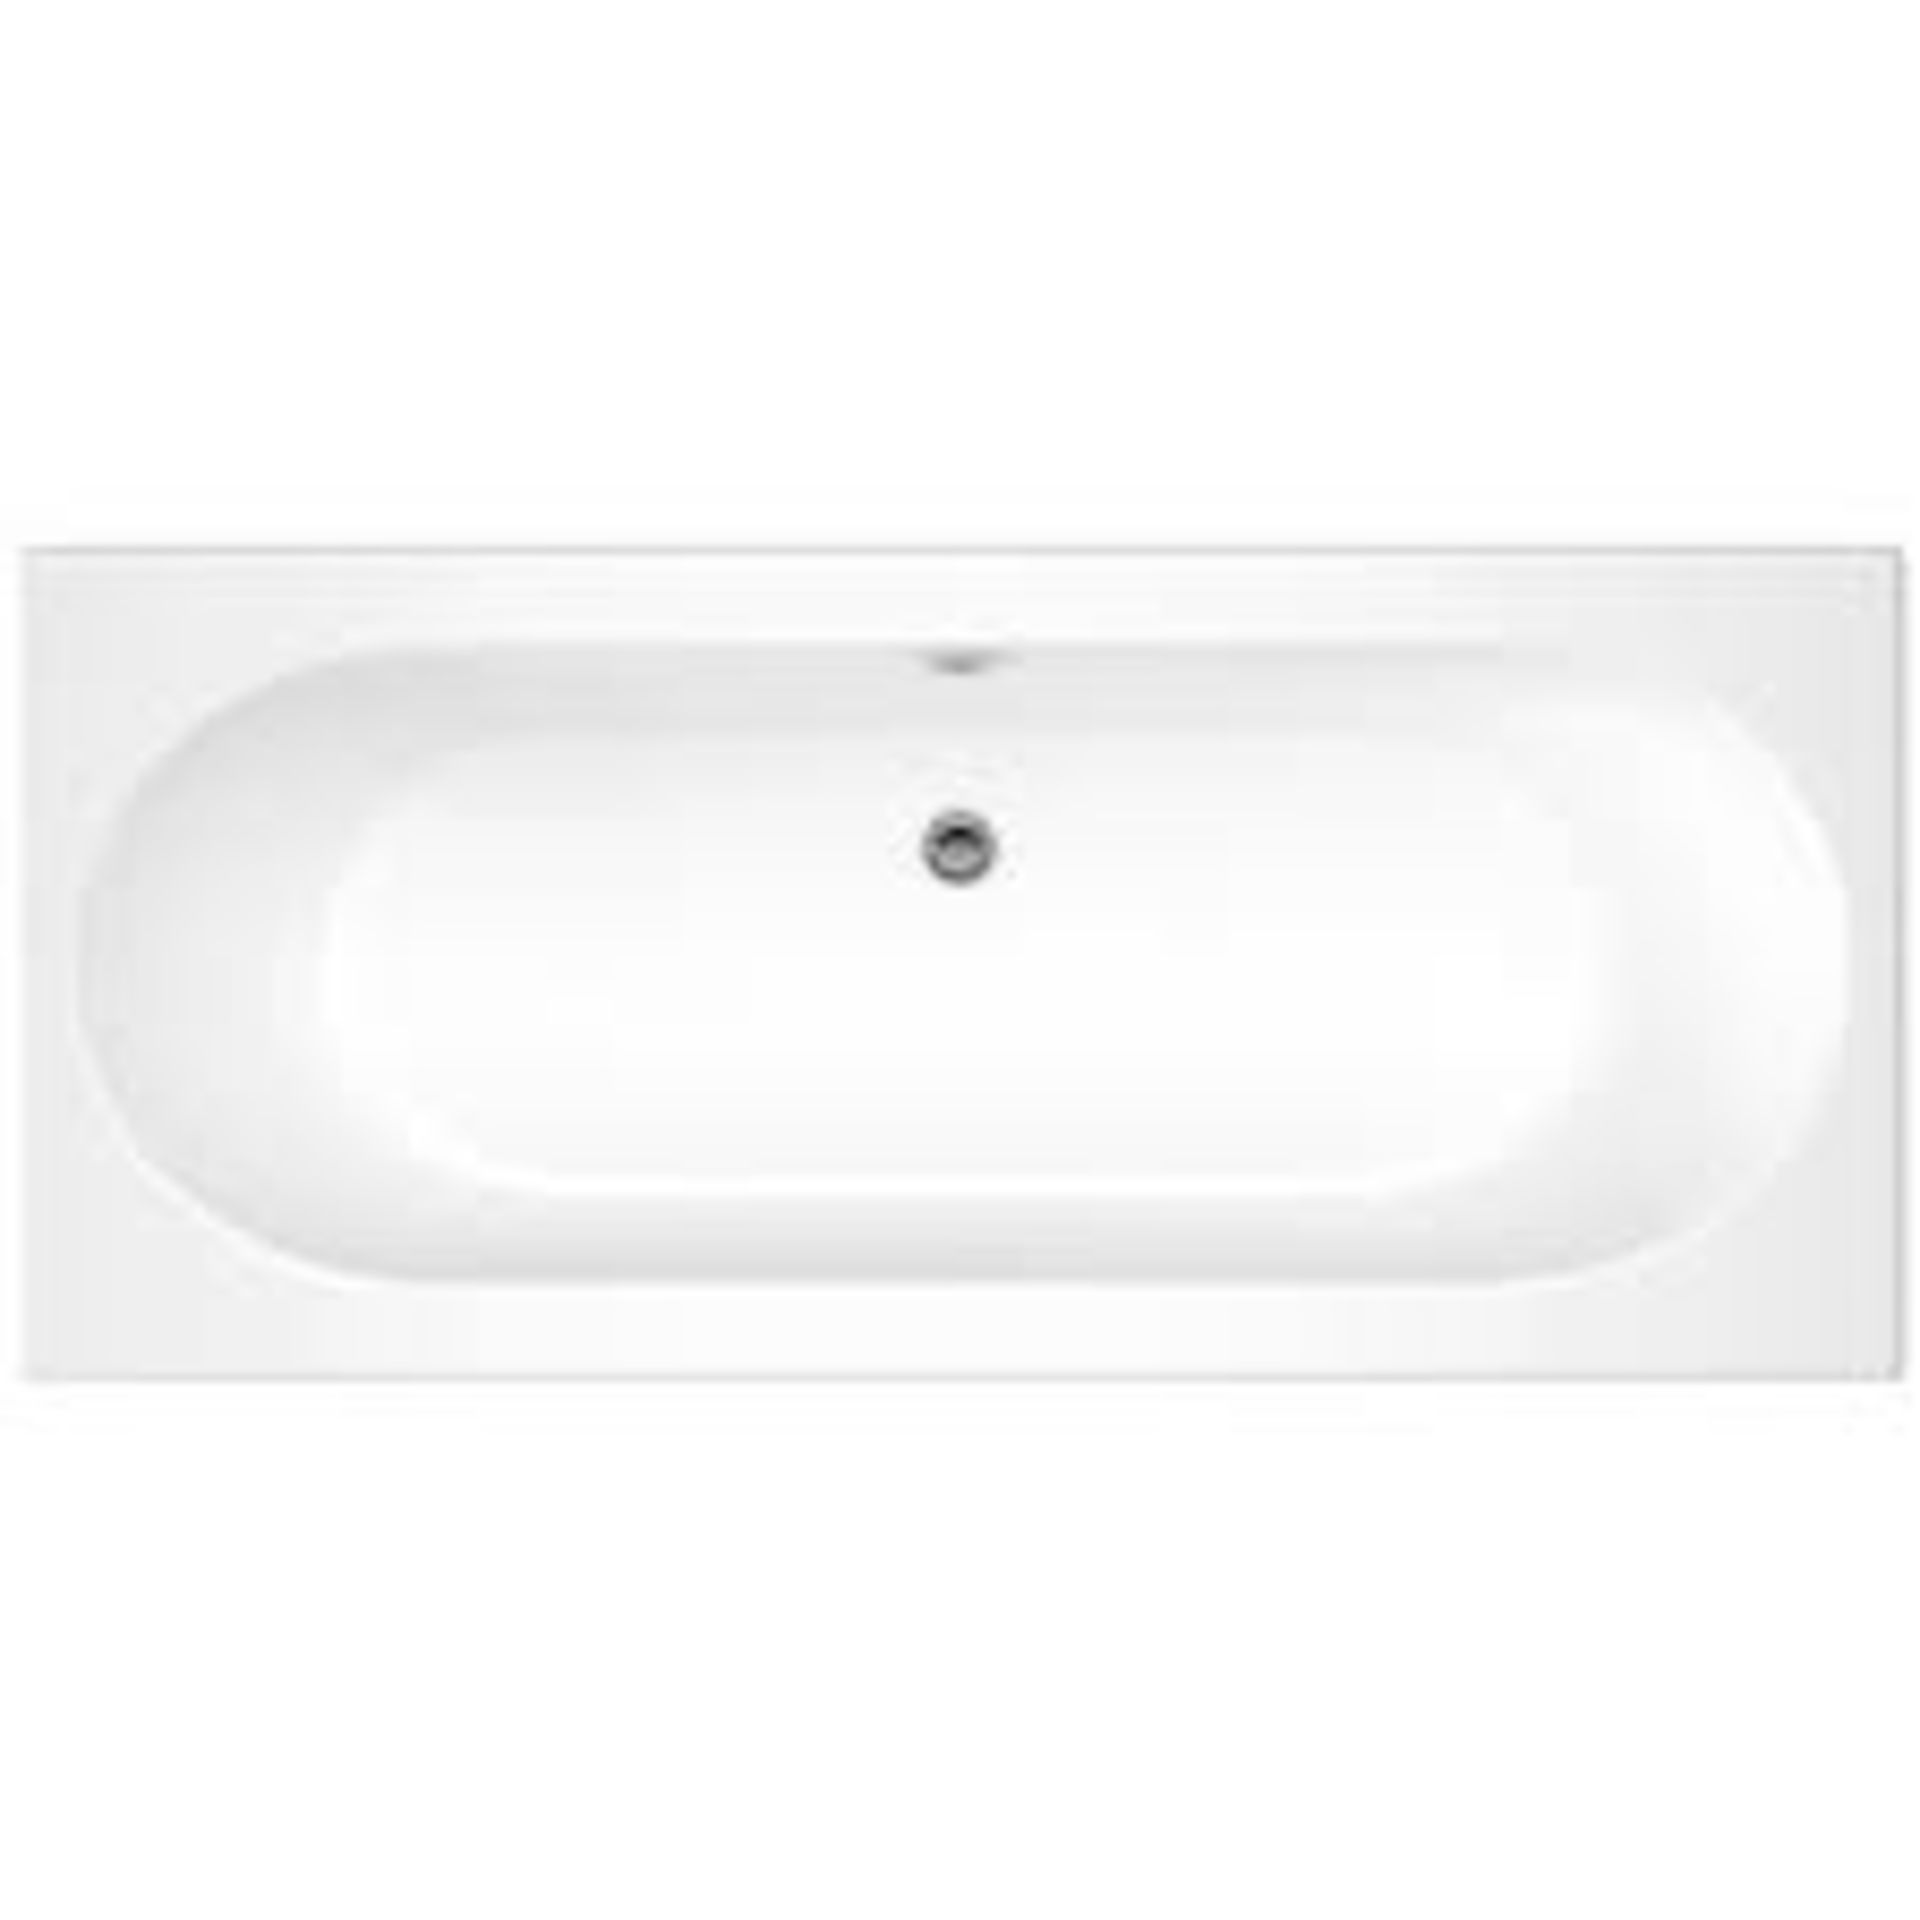 New (Y52) Cascade Supercast Double Ended 1700x700mm Bath. RRP £227.03. Cascade Supercast Doubl... - Image 2 of 2